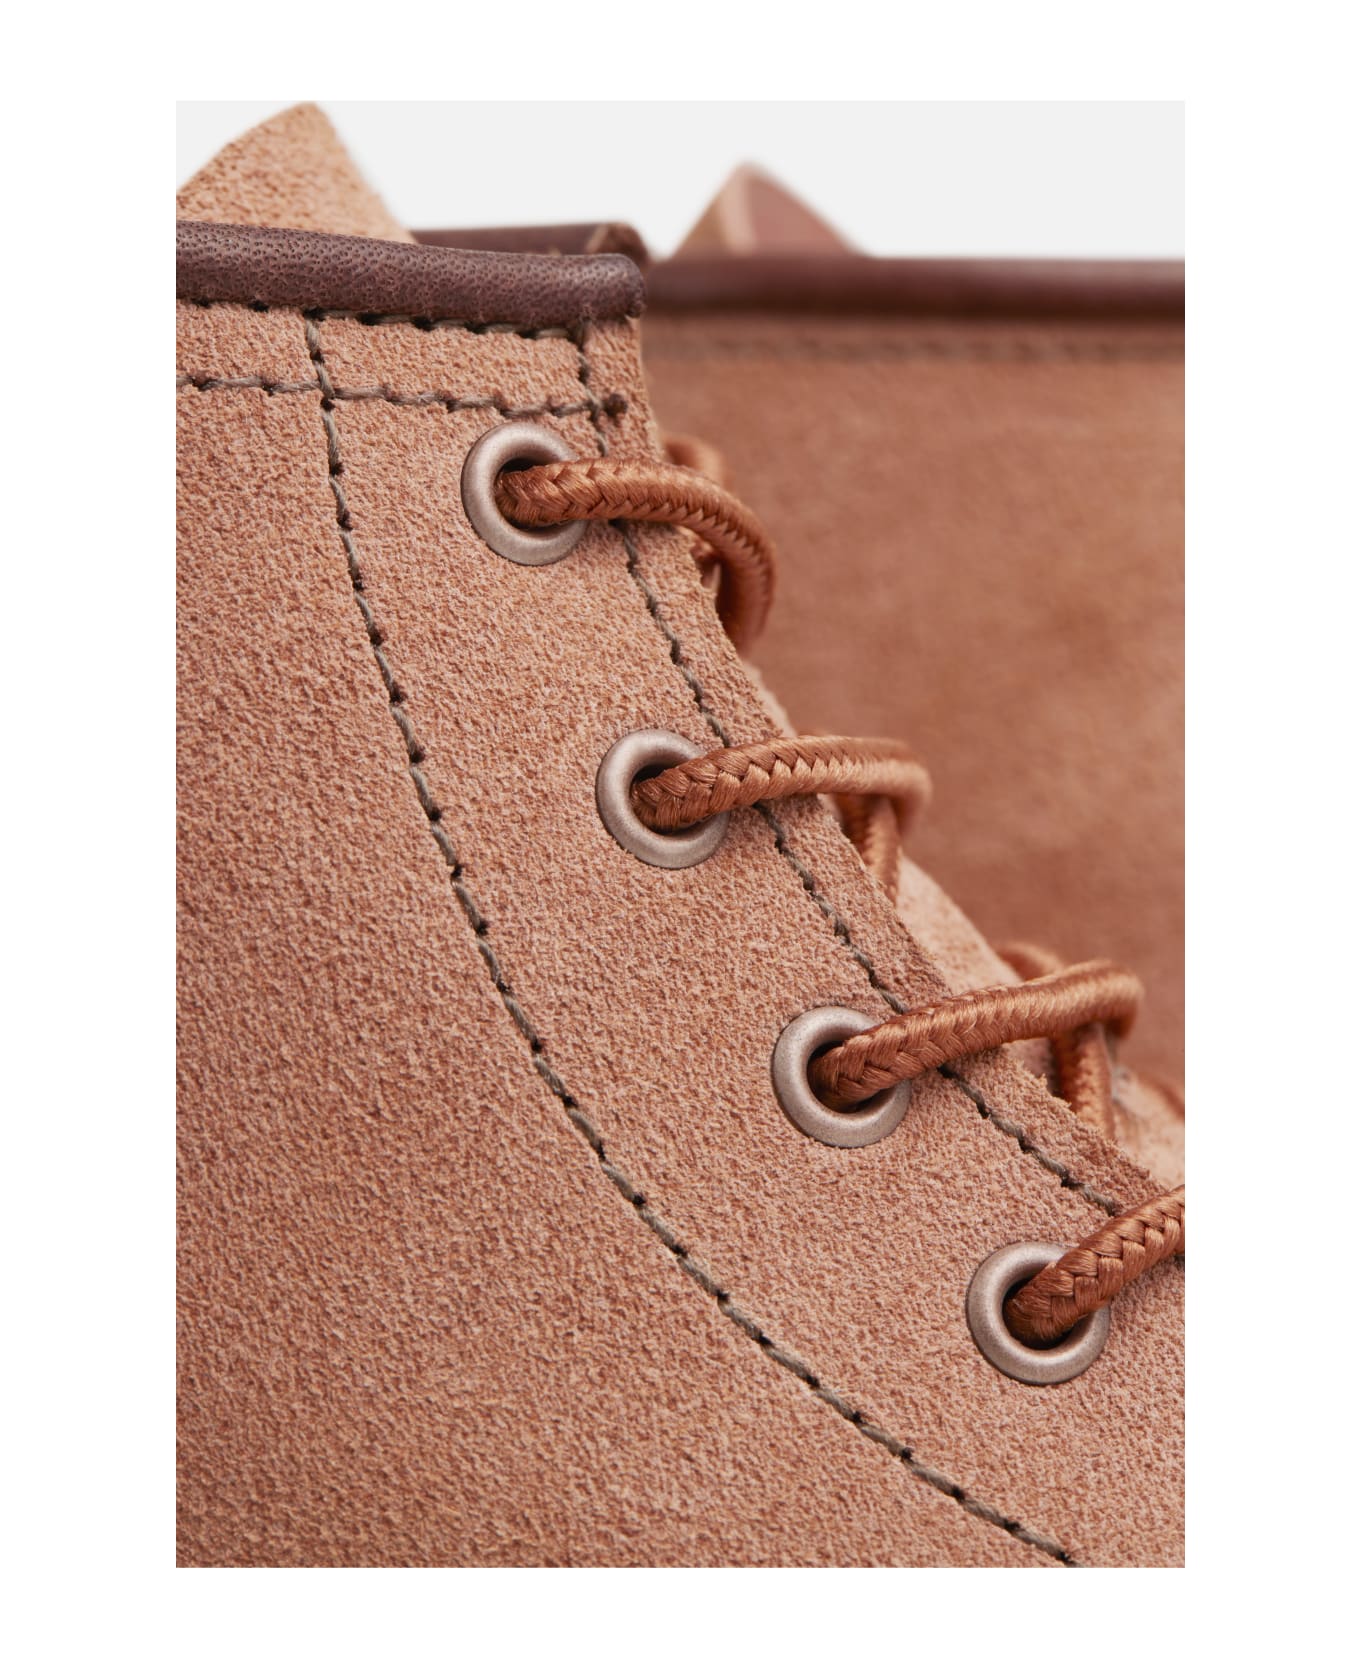 Red Wing Classic Moc - Dusty Rose